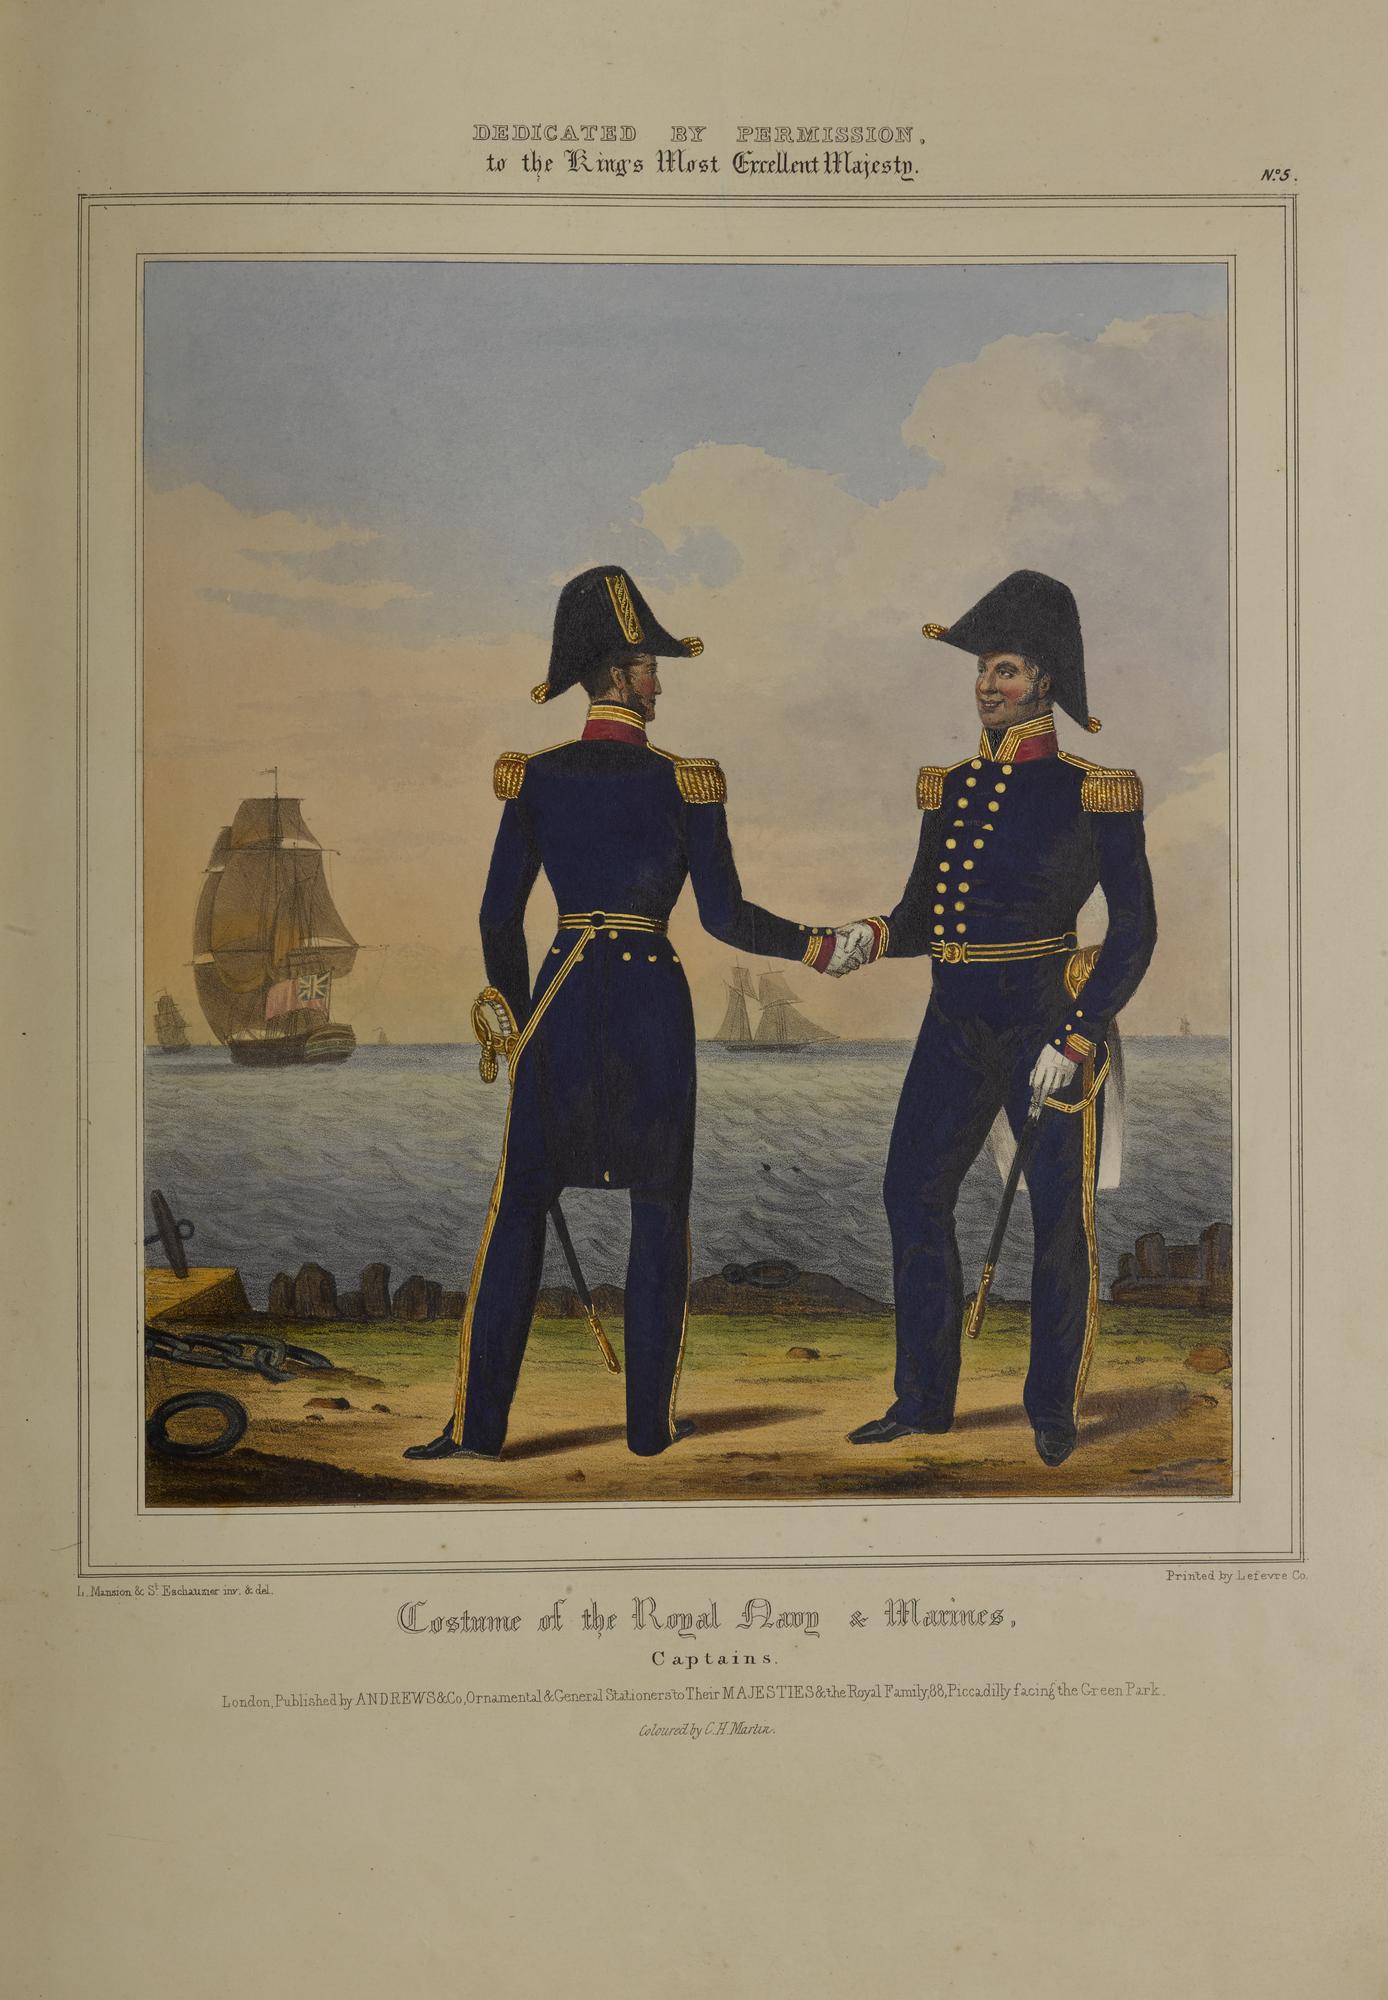 Captains from Costume of the Royal Navy and Marines, 1833.